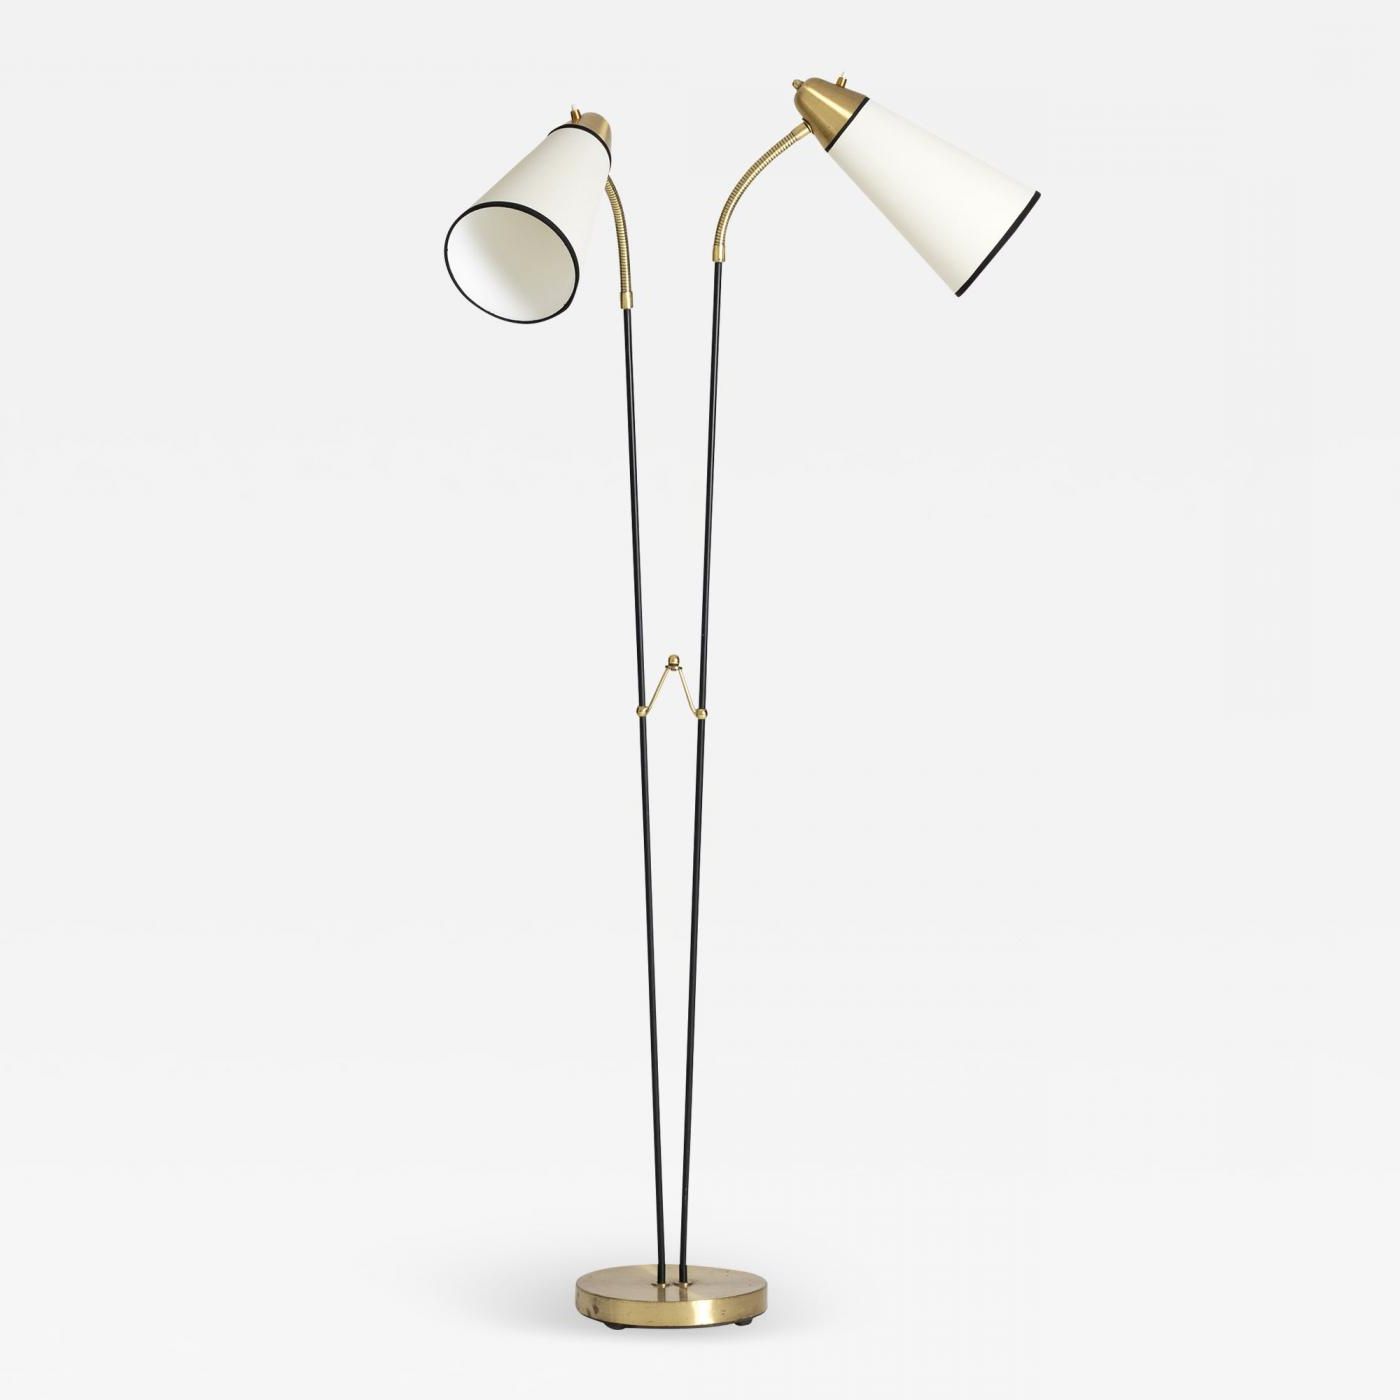 Midcentury Brass And Black Two Arm Floor Lamp For Fashionable 2 Arm Floor Lamps (View 1 of 15)